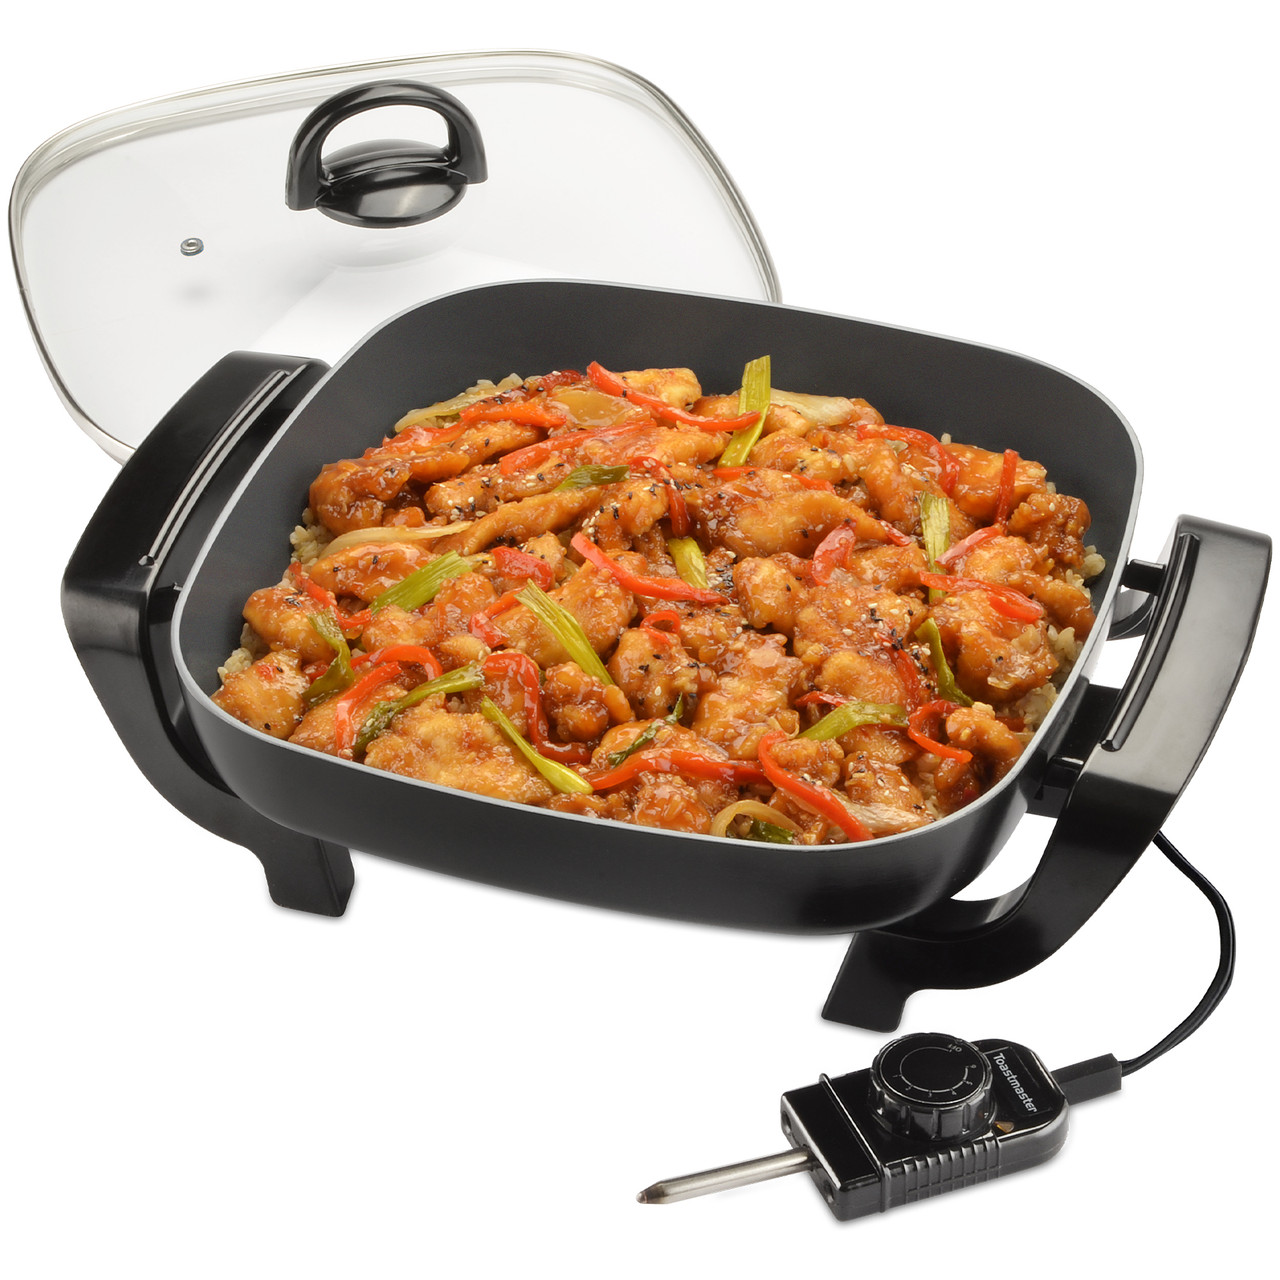 The 12 Absolute Best Uses For Your Electric Frying Pan